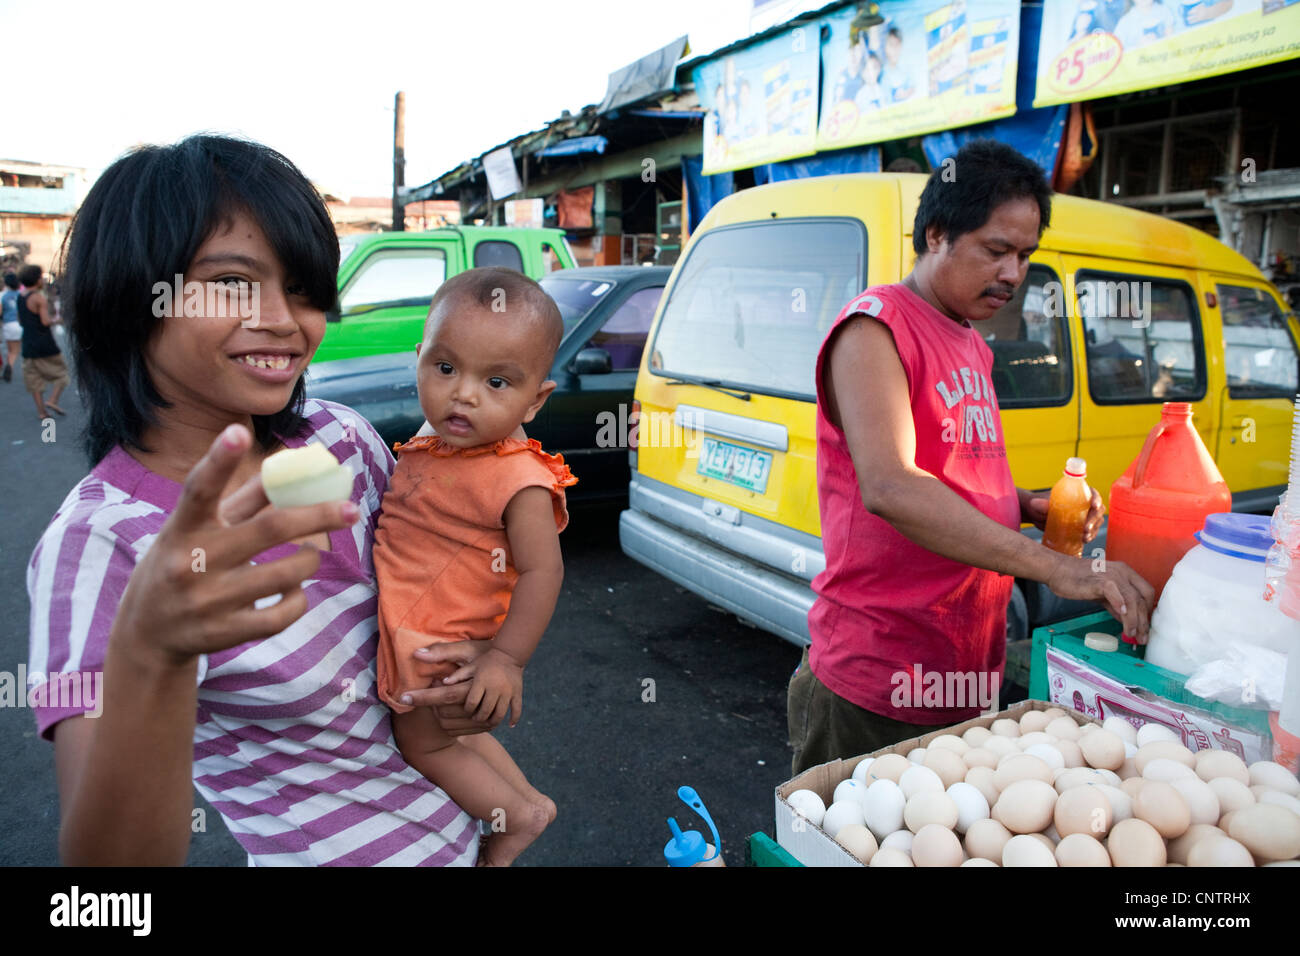 Woman with her baby, she is buying Balut, a fertilized duck embryo from a roadside vendor. Carbon Market, Cebu City, Philippines Stock Photo